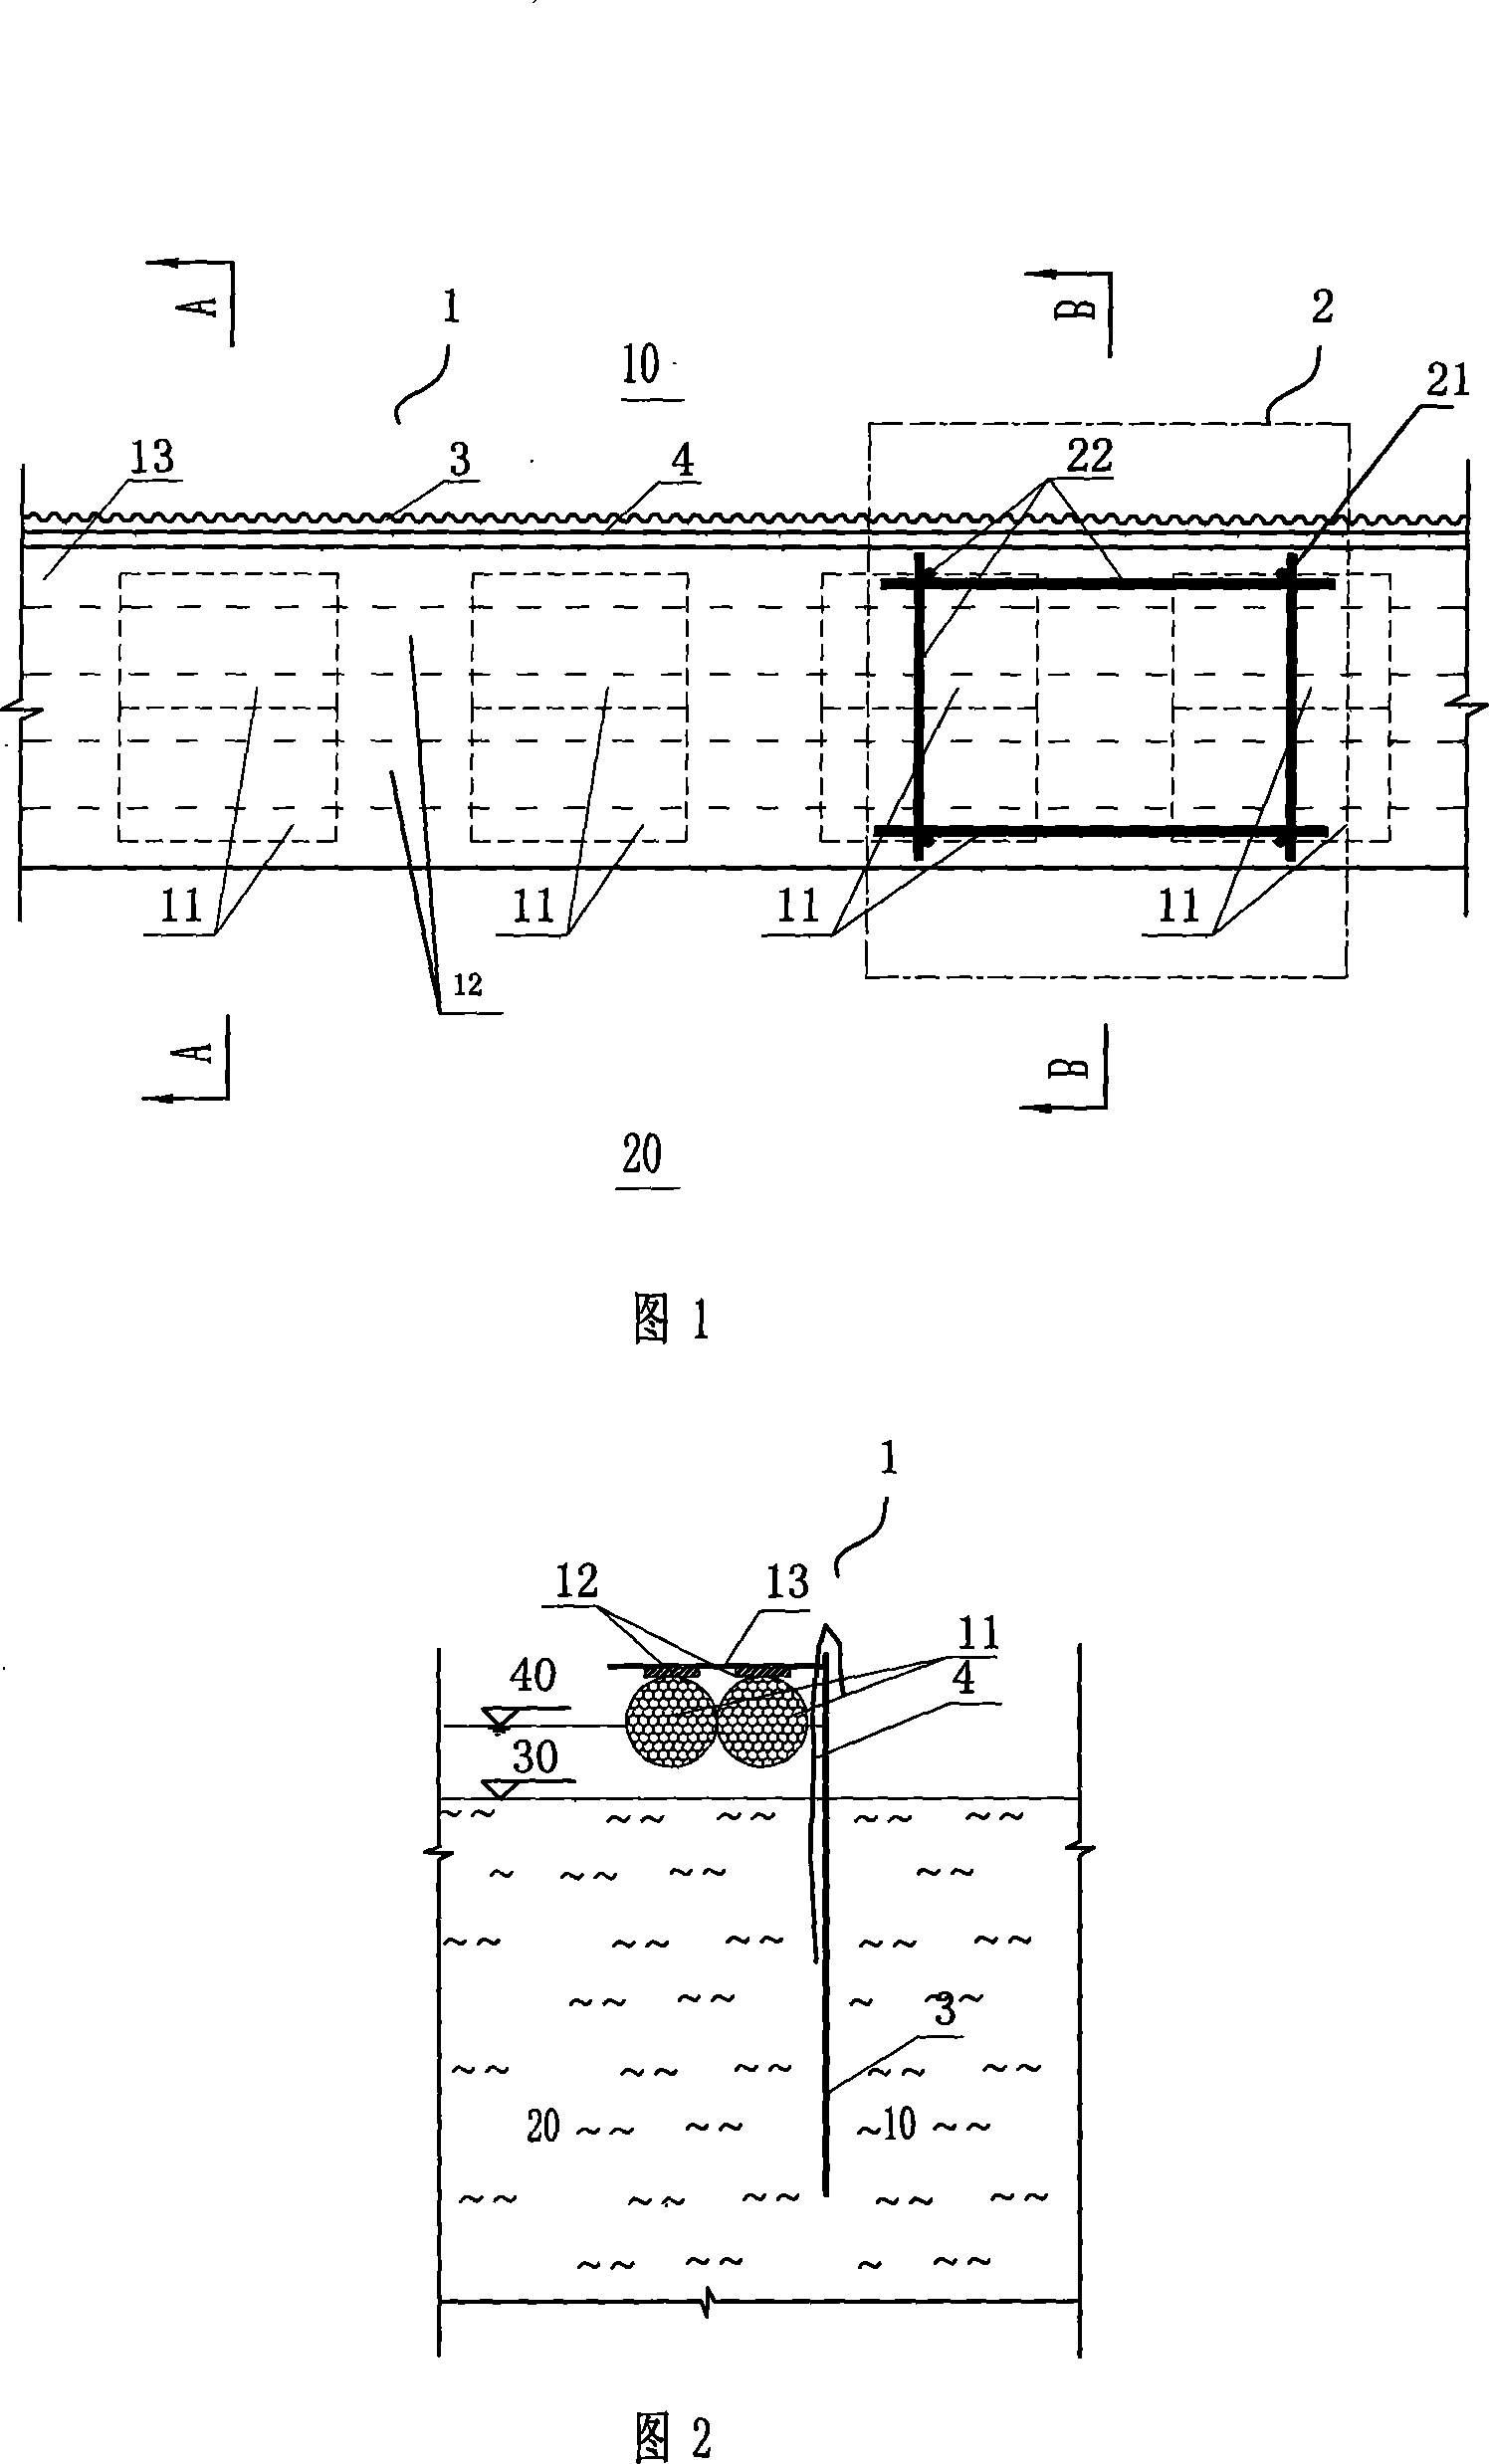 Method for rapidly reinforcing ultra-soft soil superficial layer